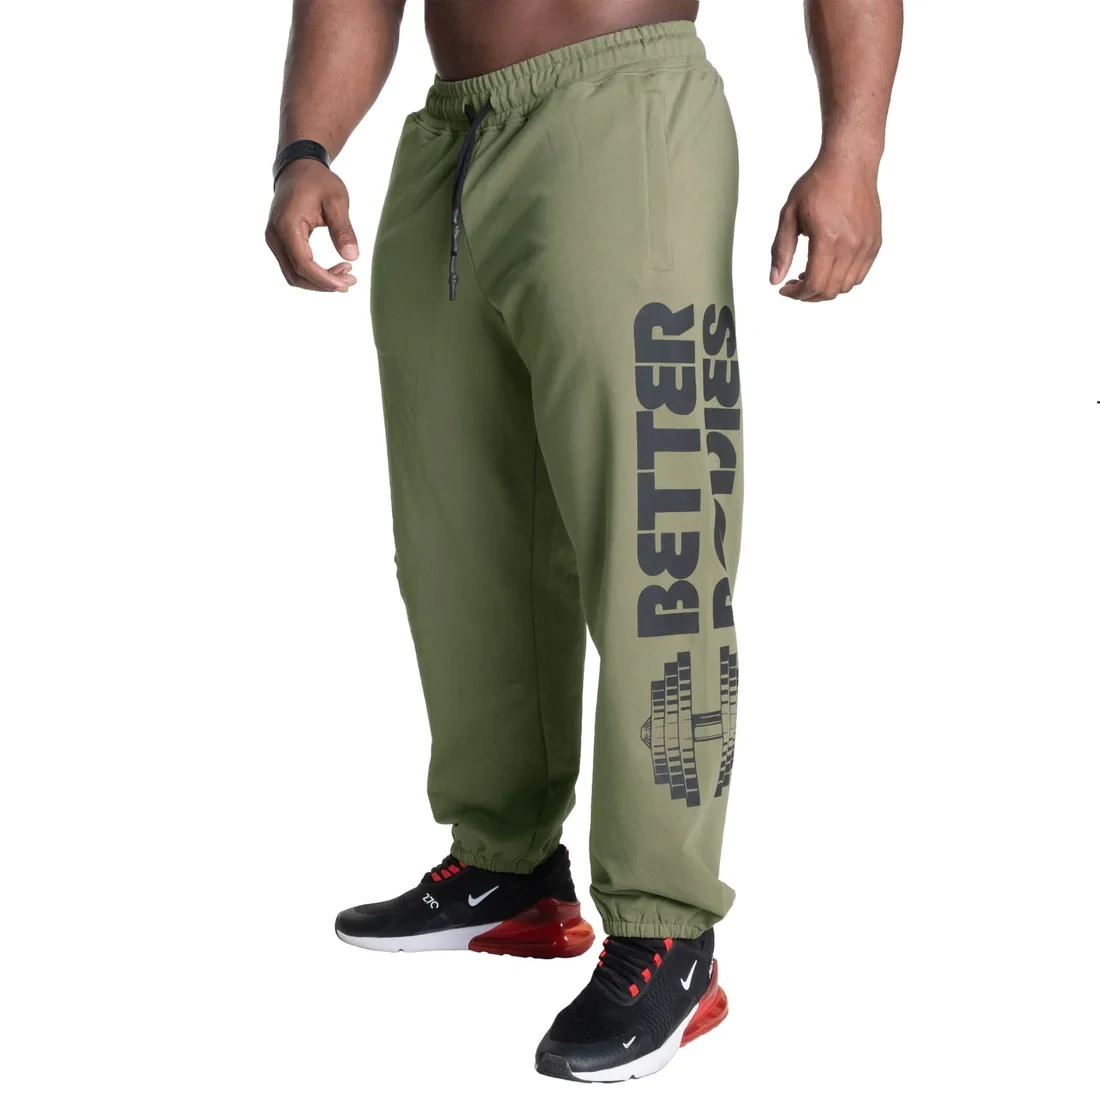 Брюки "Stanton Sweatpants", Washed Green, Better Bodies